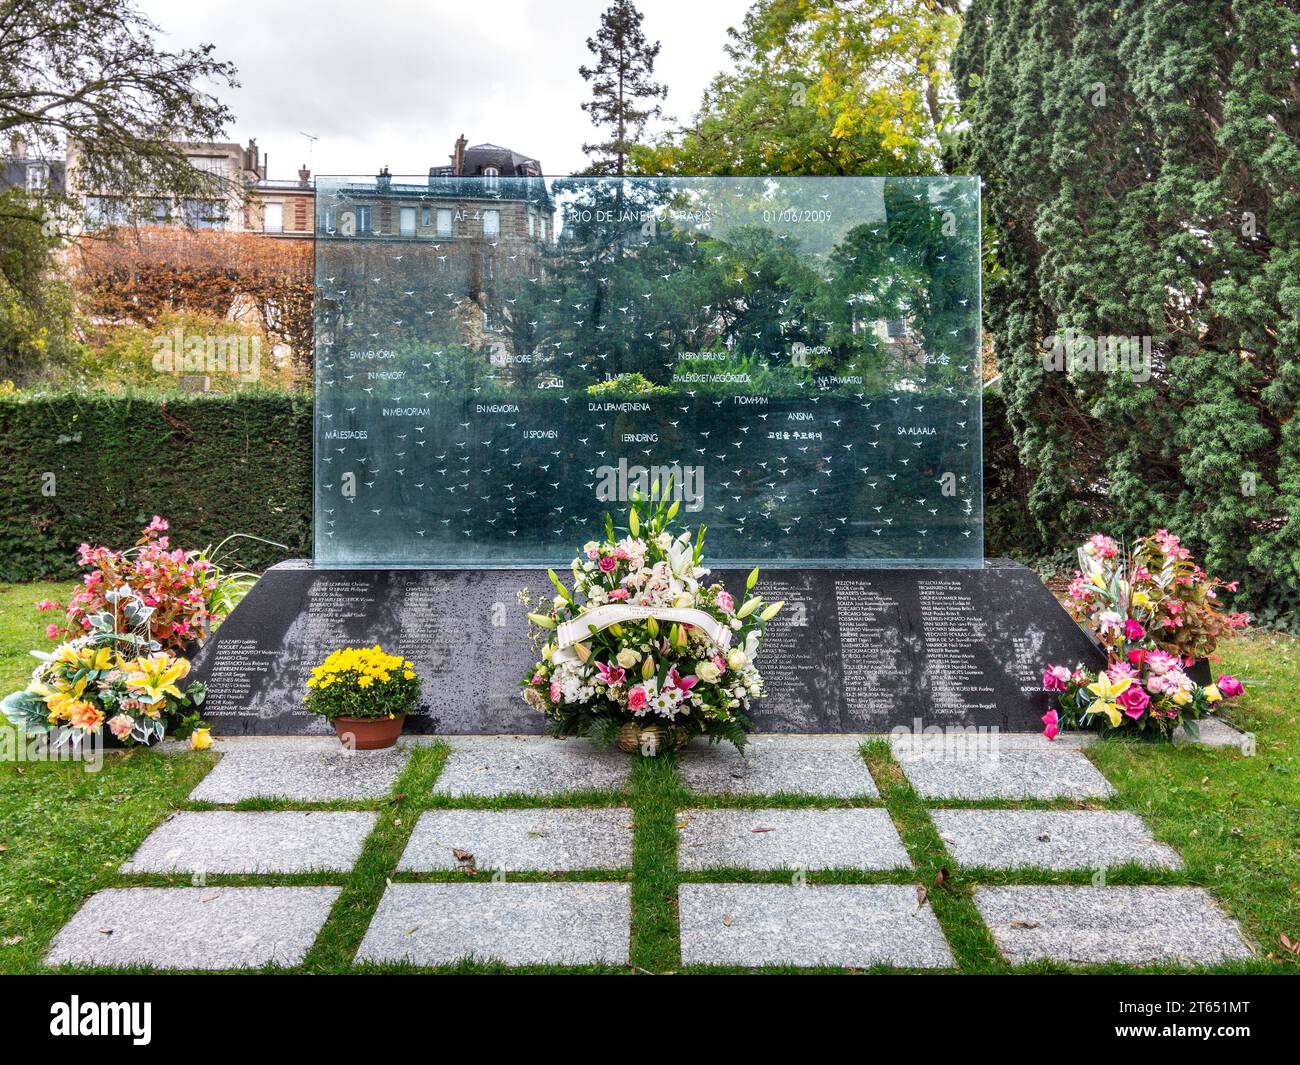 Memorial to the lives lost on Air France flight 447 which crashed into the South Atlantic in 2009 - Père Lachaise cemetery, Paris 20, France. Stock Photo